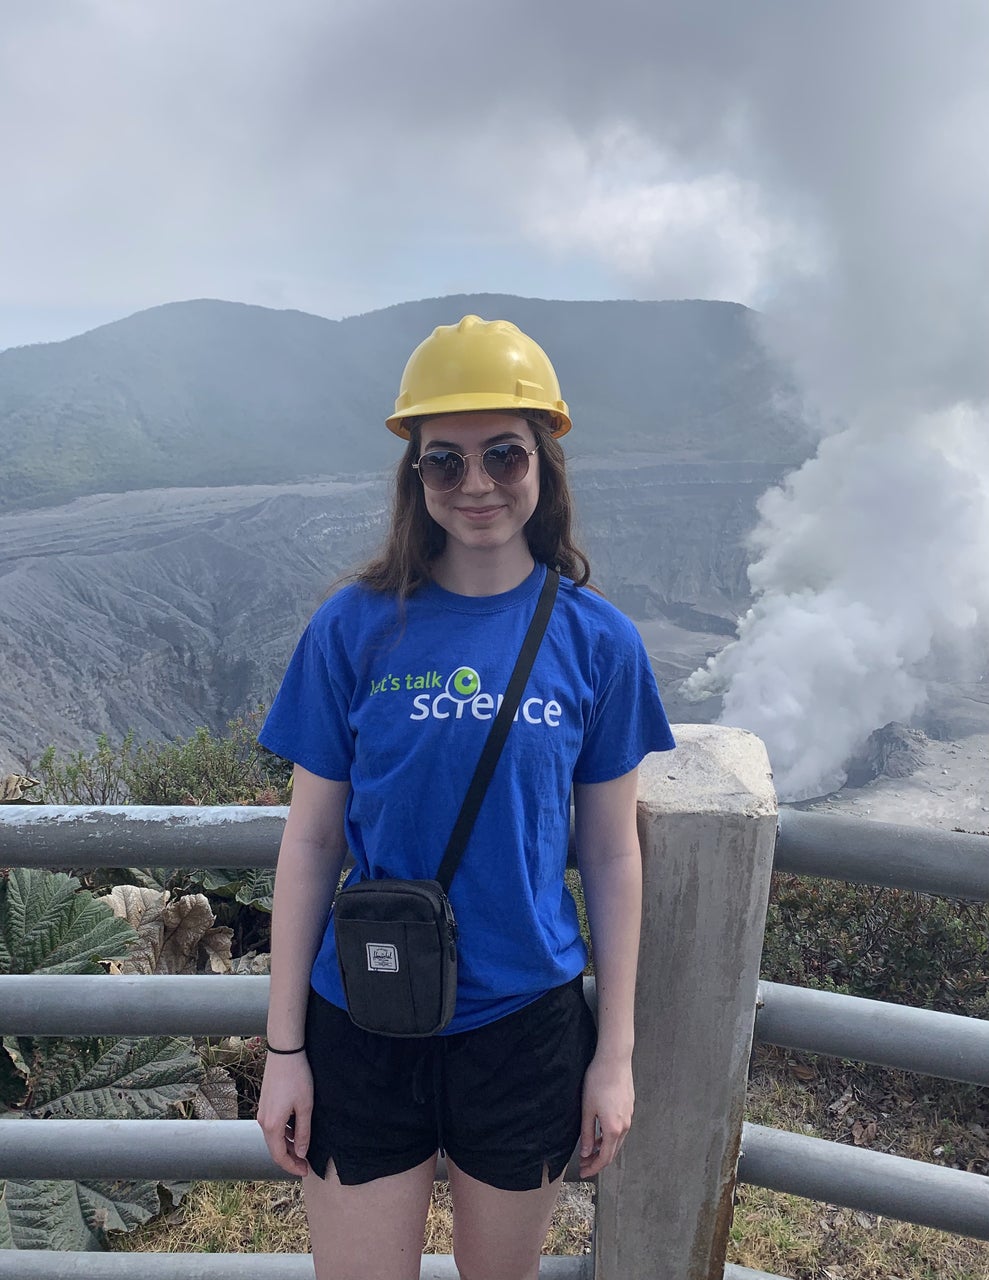 Sydney standing in front of an volcano site. She is wearing a yellow contruction helmet and a blue t-shirt that says &quot;Let's talk science&quot;. 